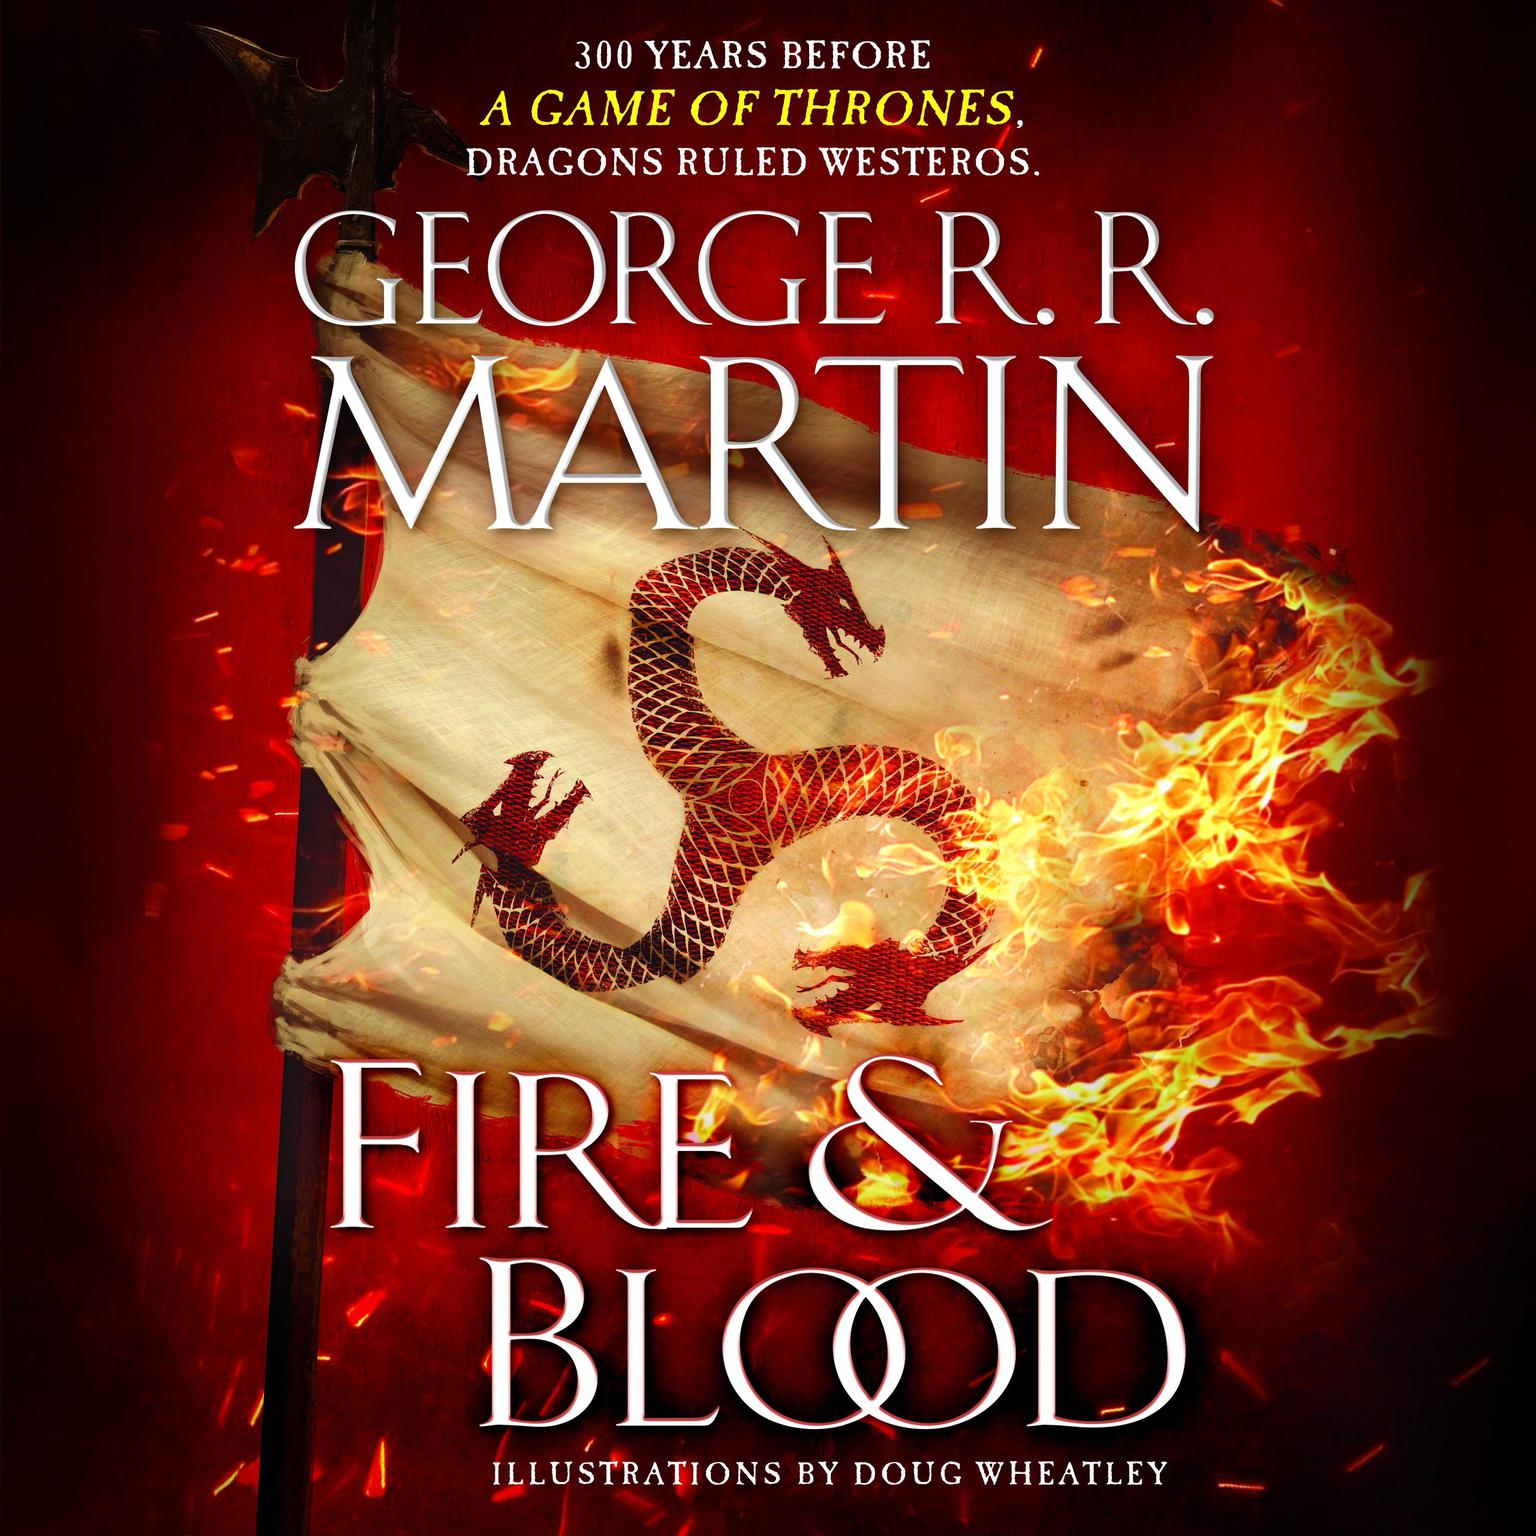 Fire & Blood (HBO Tie-in Edition): 300 Years Before A Game of Thrones Audiobook, by George R. R. Martin